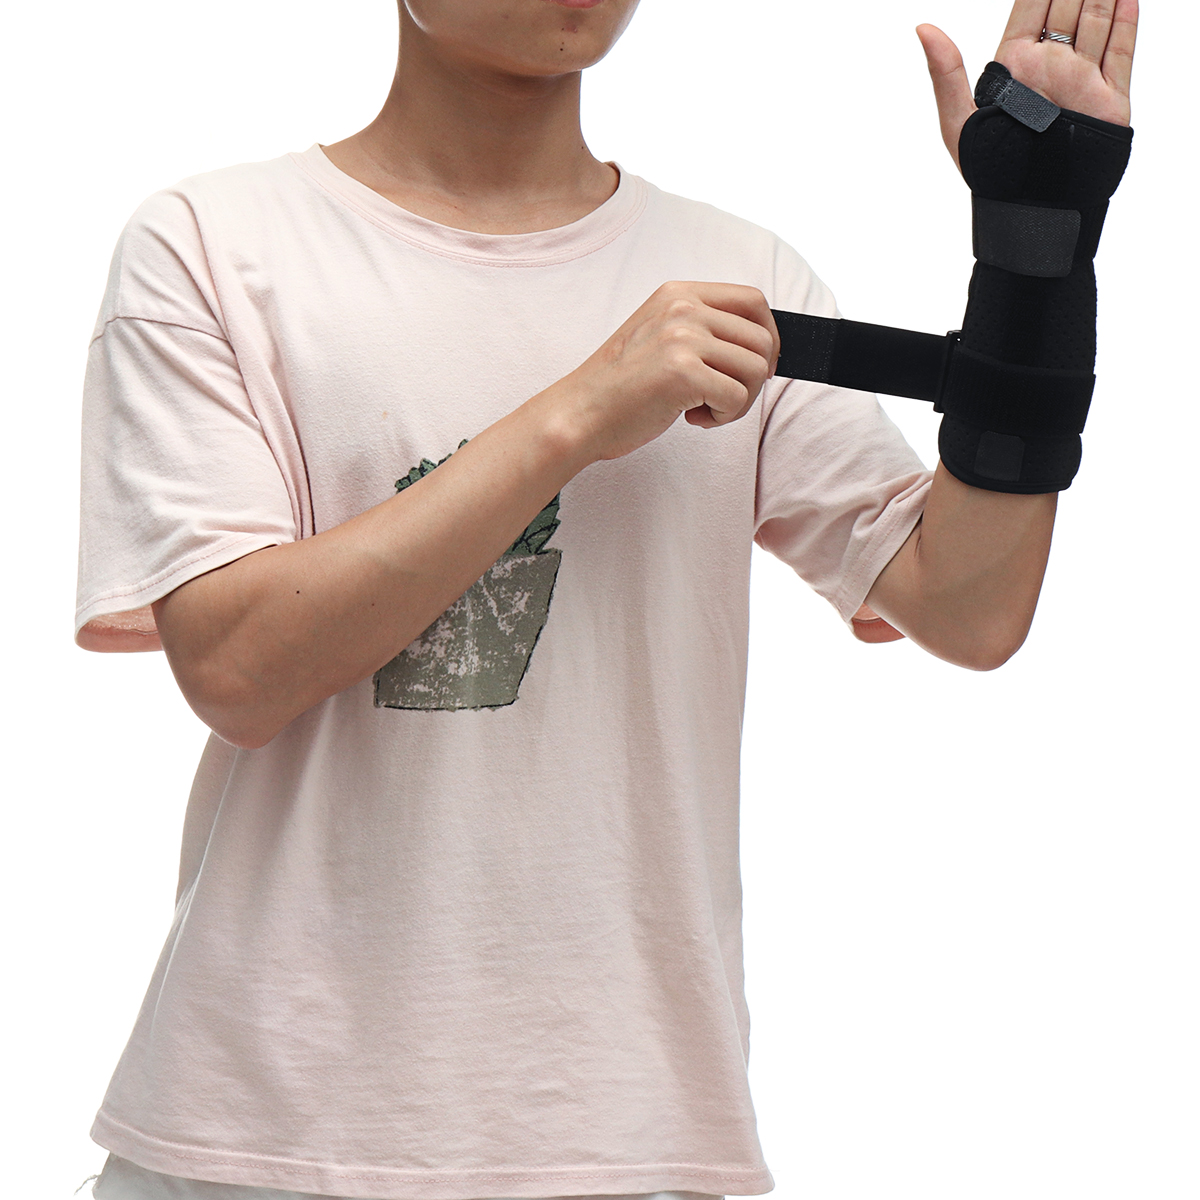 Breathable-Adjustable-Wrist-Support-Wrist-Brace-Wrist-Joint-Fixation-Sprain-Protector-Medical-Protec-1571406-7